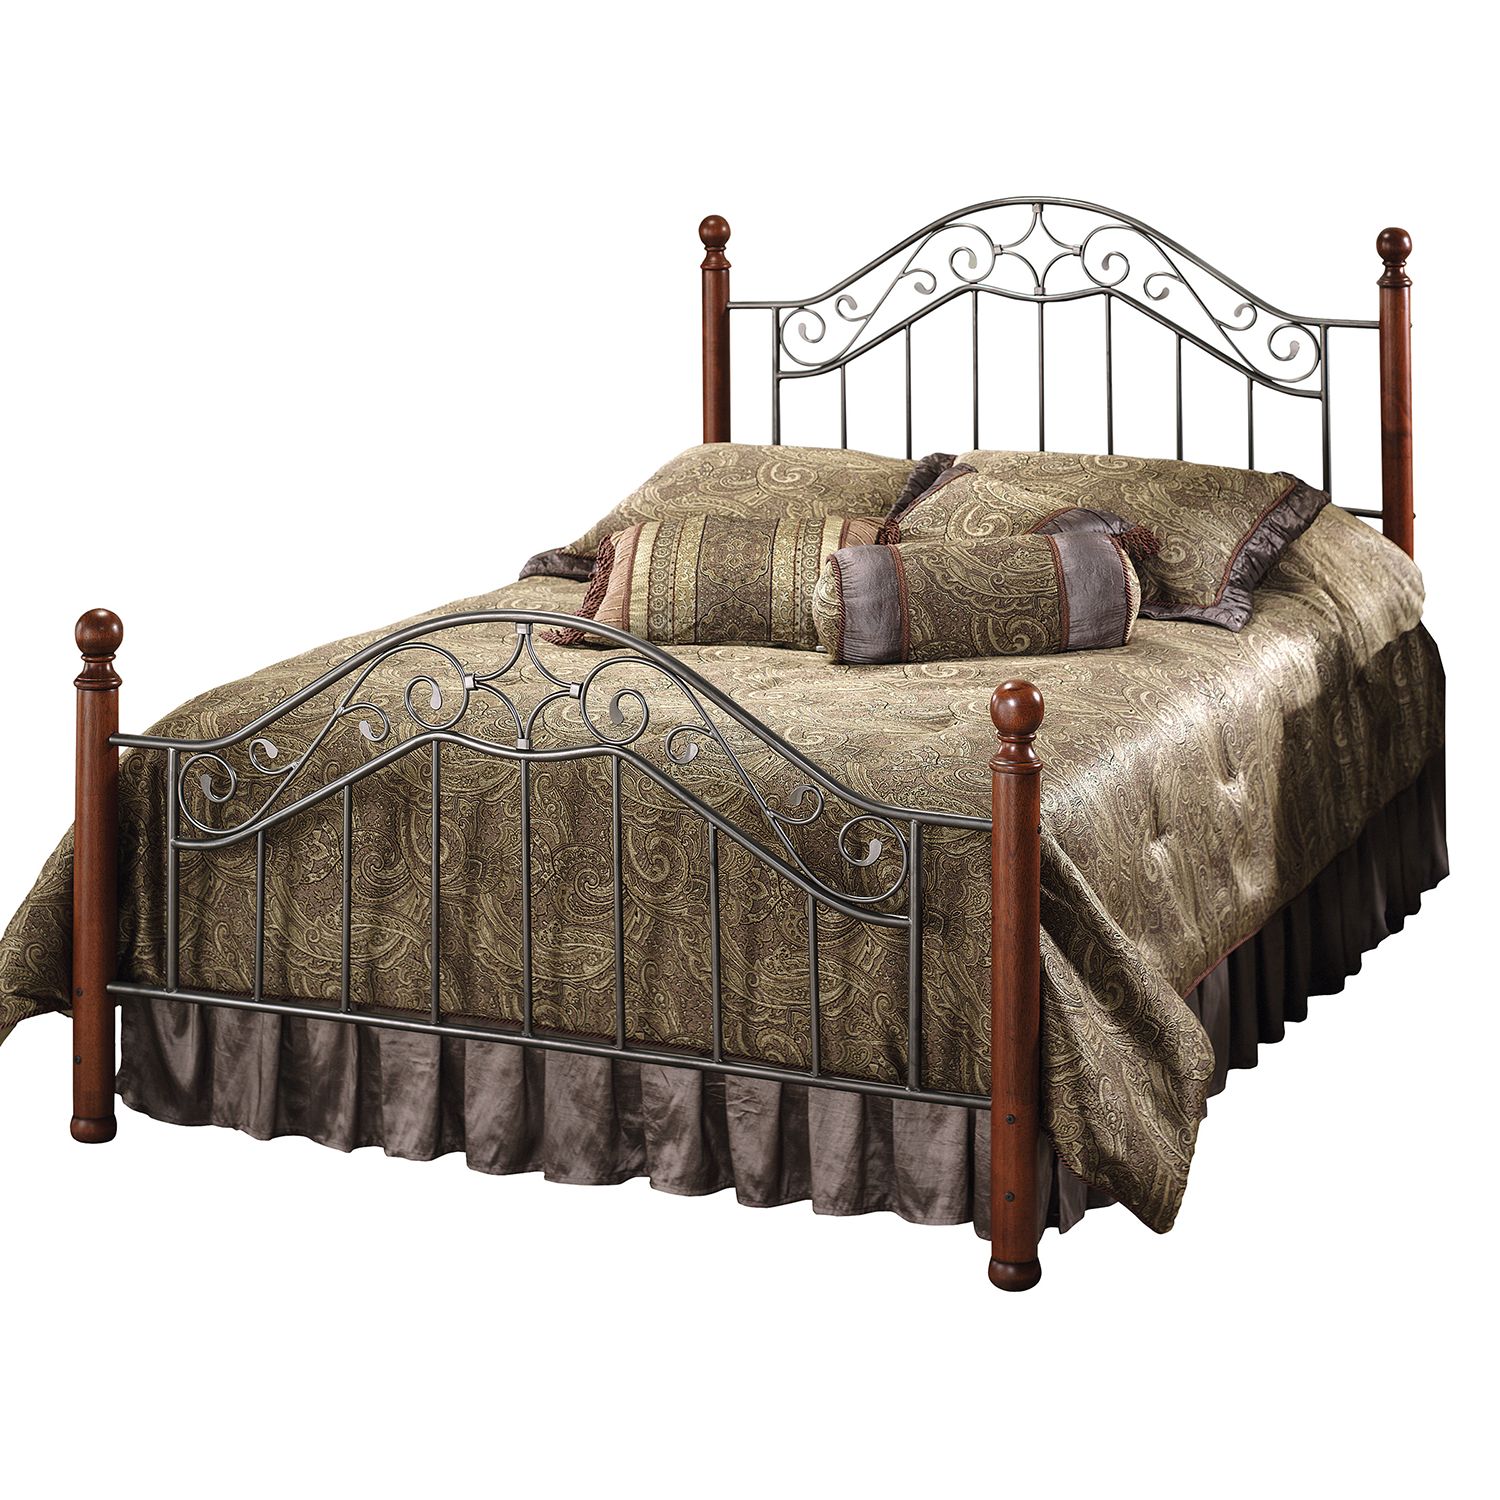 Image for Hillsdale Furniture Martino Bed at Kohl's.